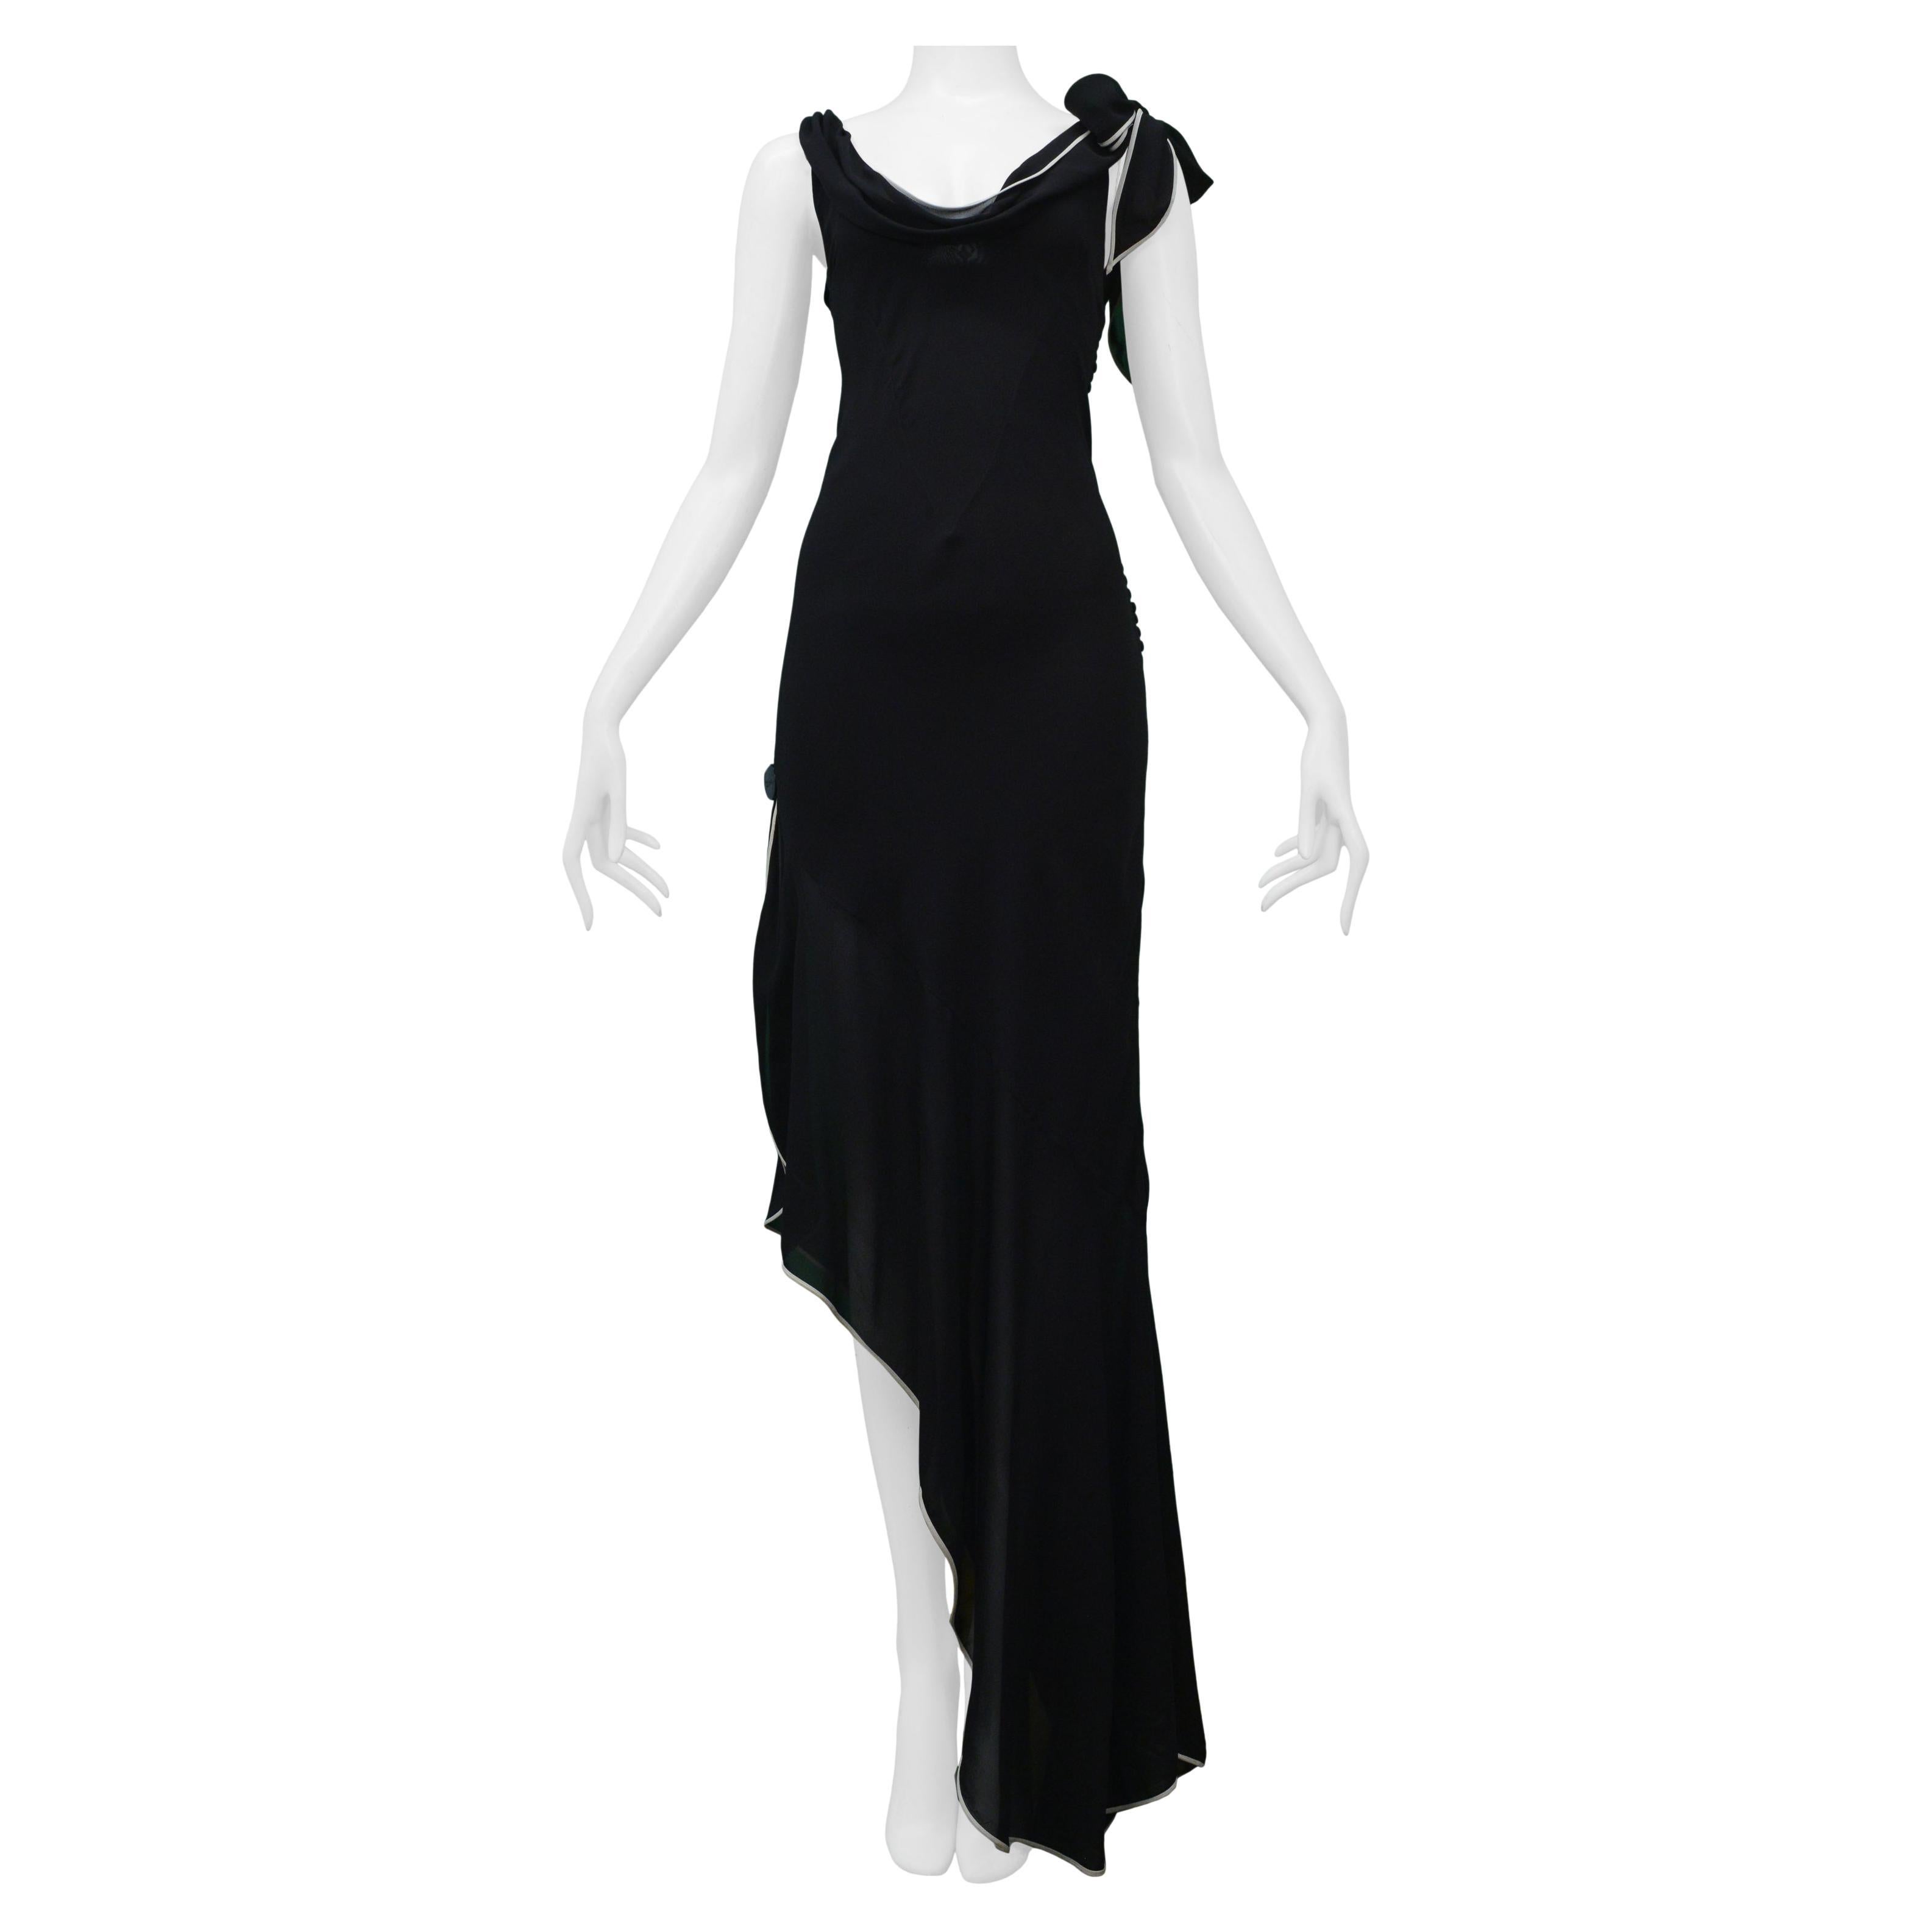 Christian Dior Black Maxi Evening Dress With White Trim And Bow